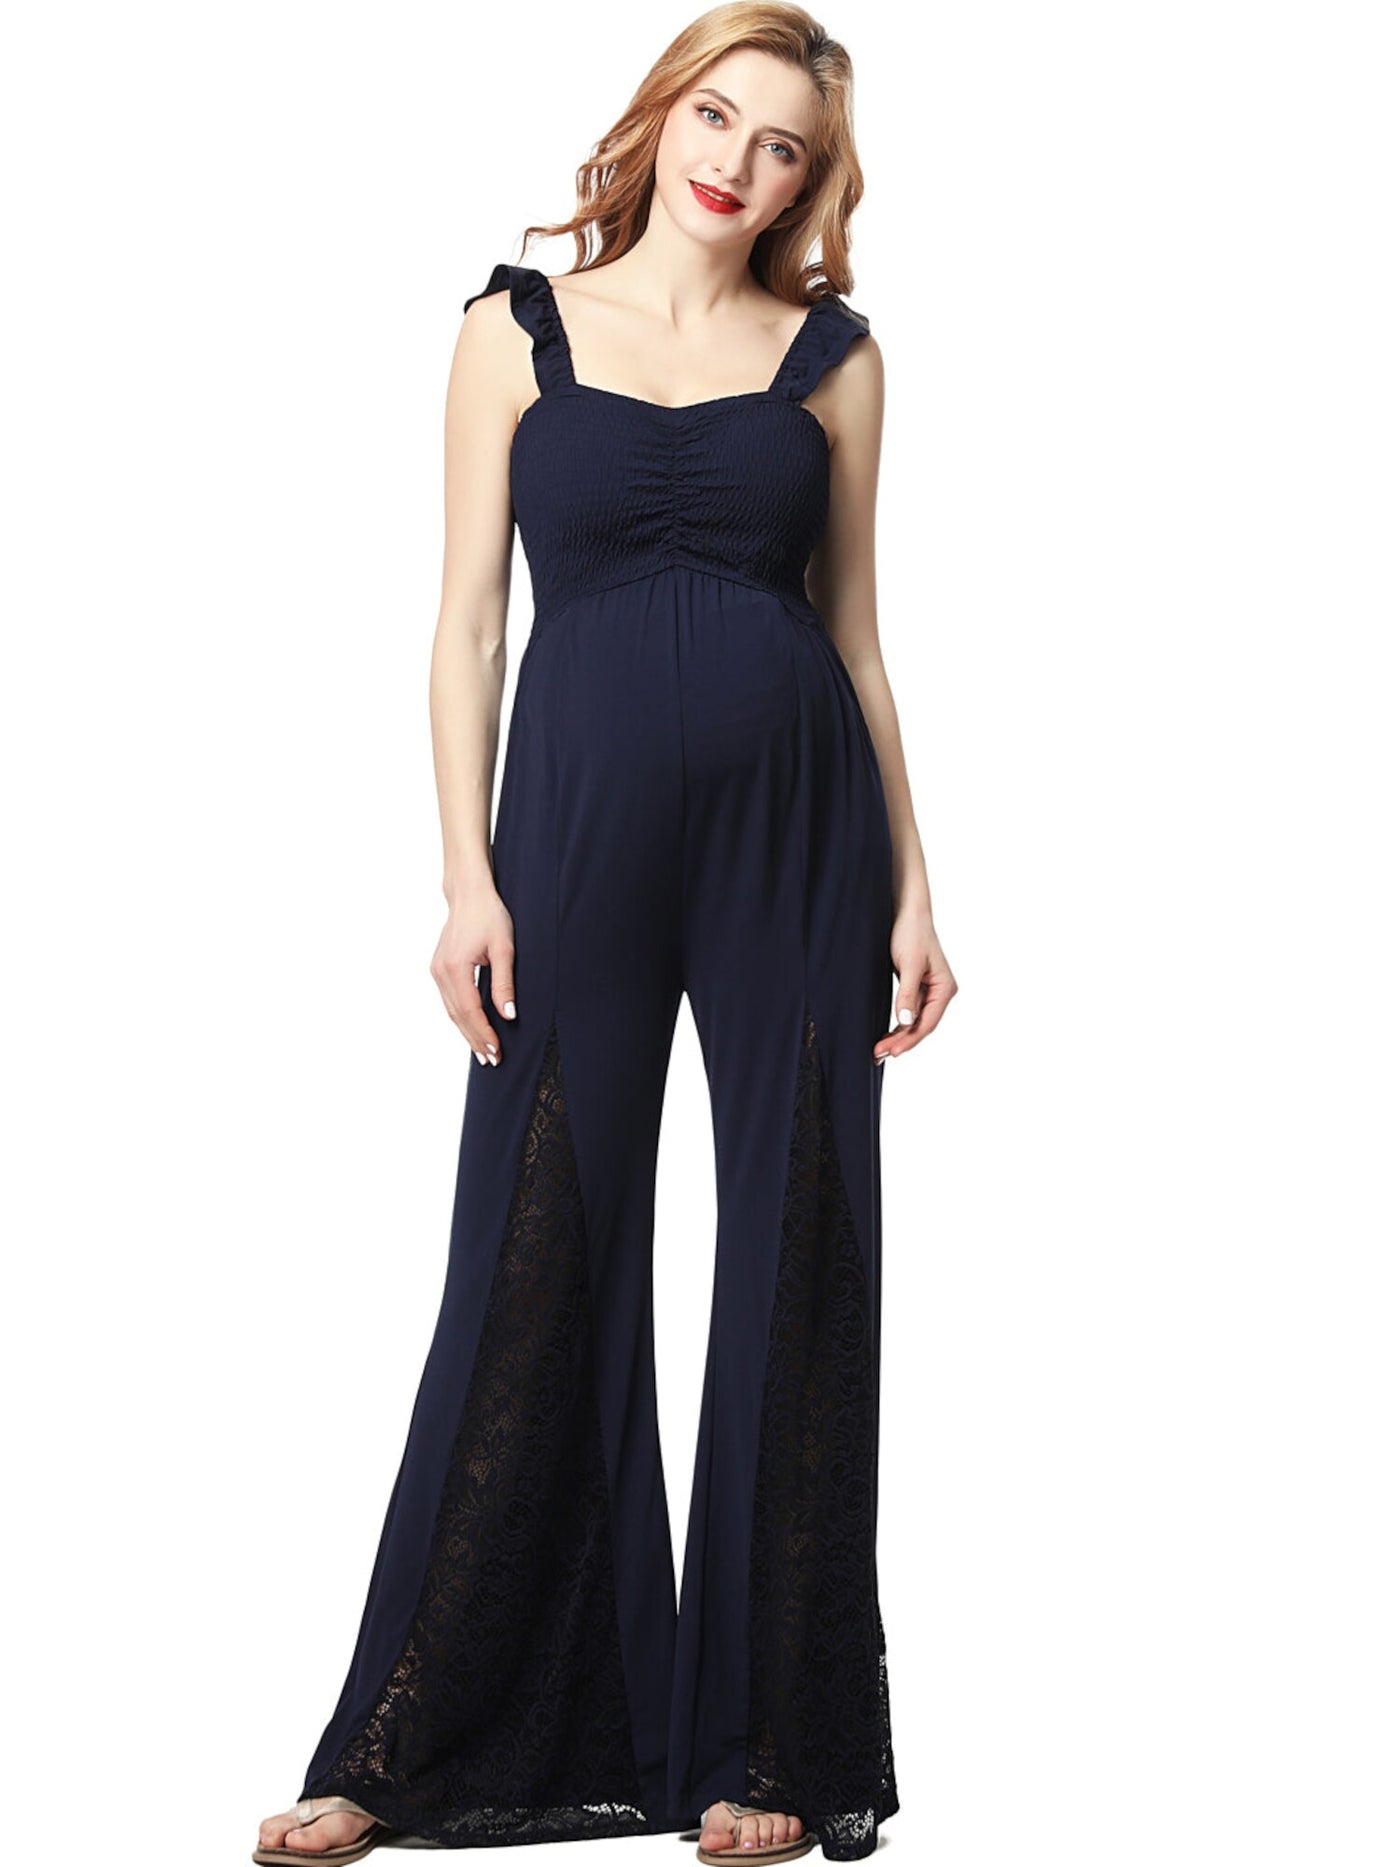 KIMI & KAI Womens Navy Stretch Ruffled Smocked Ruched Pocketed Lace Sleeveless Sweetheart Neckline Jumpsuit Maternity L